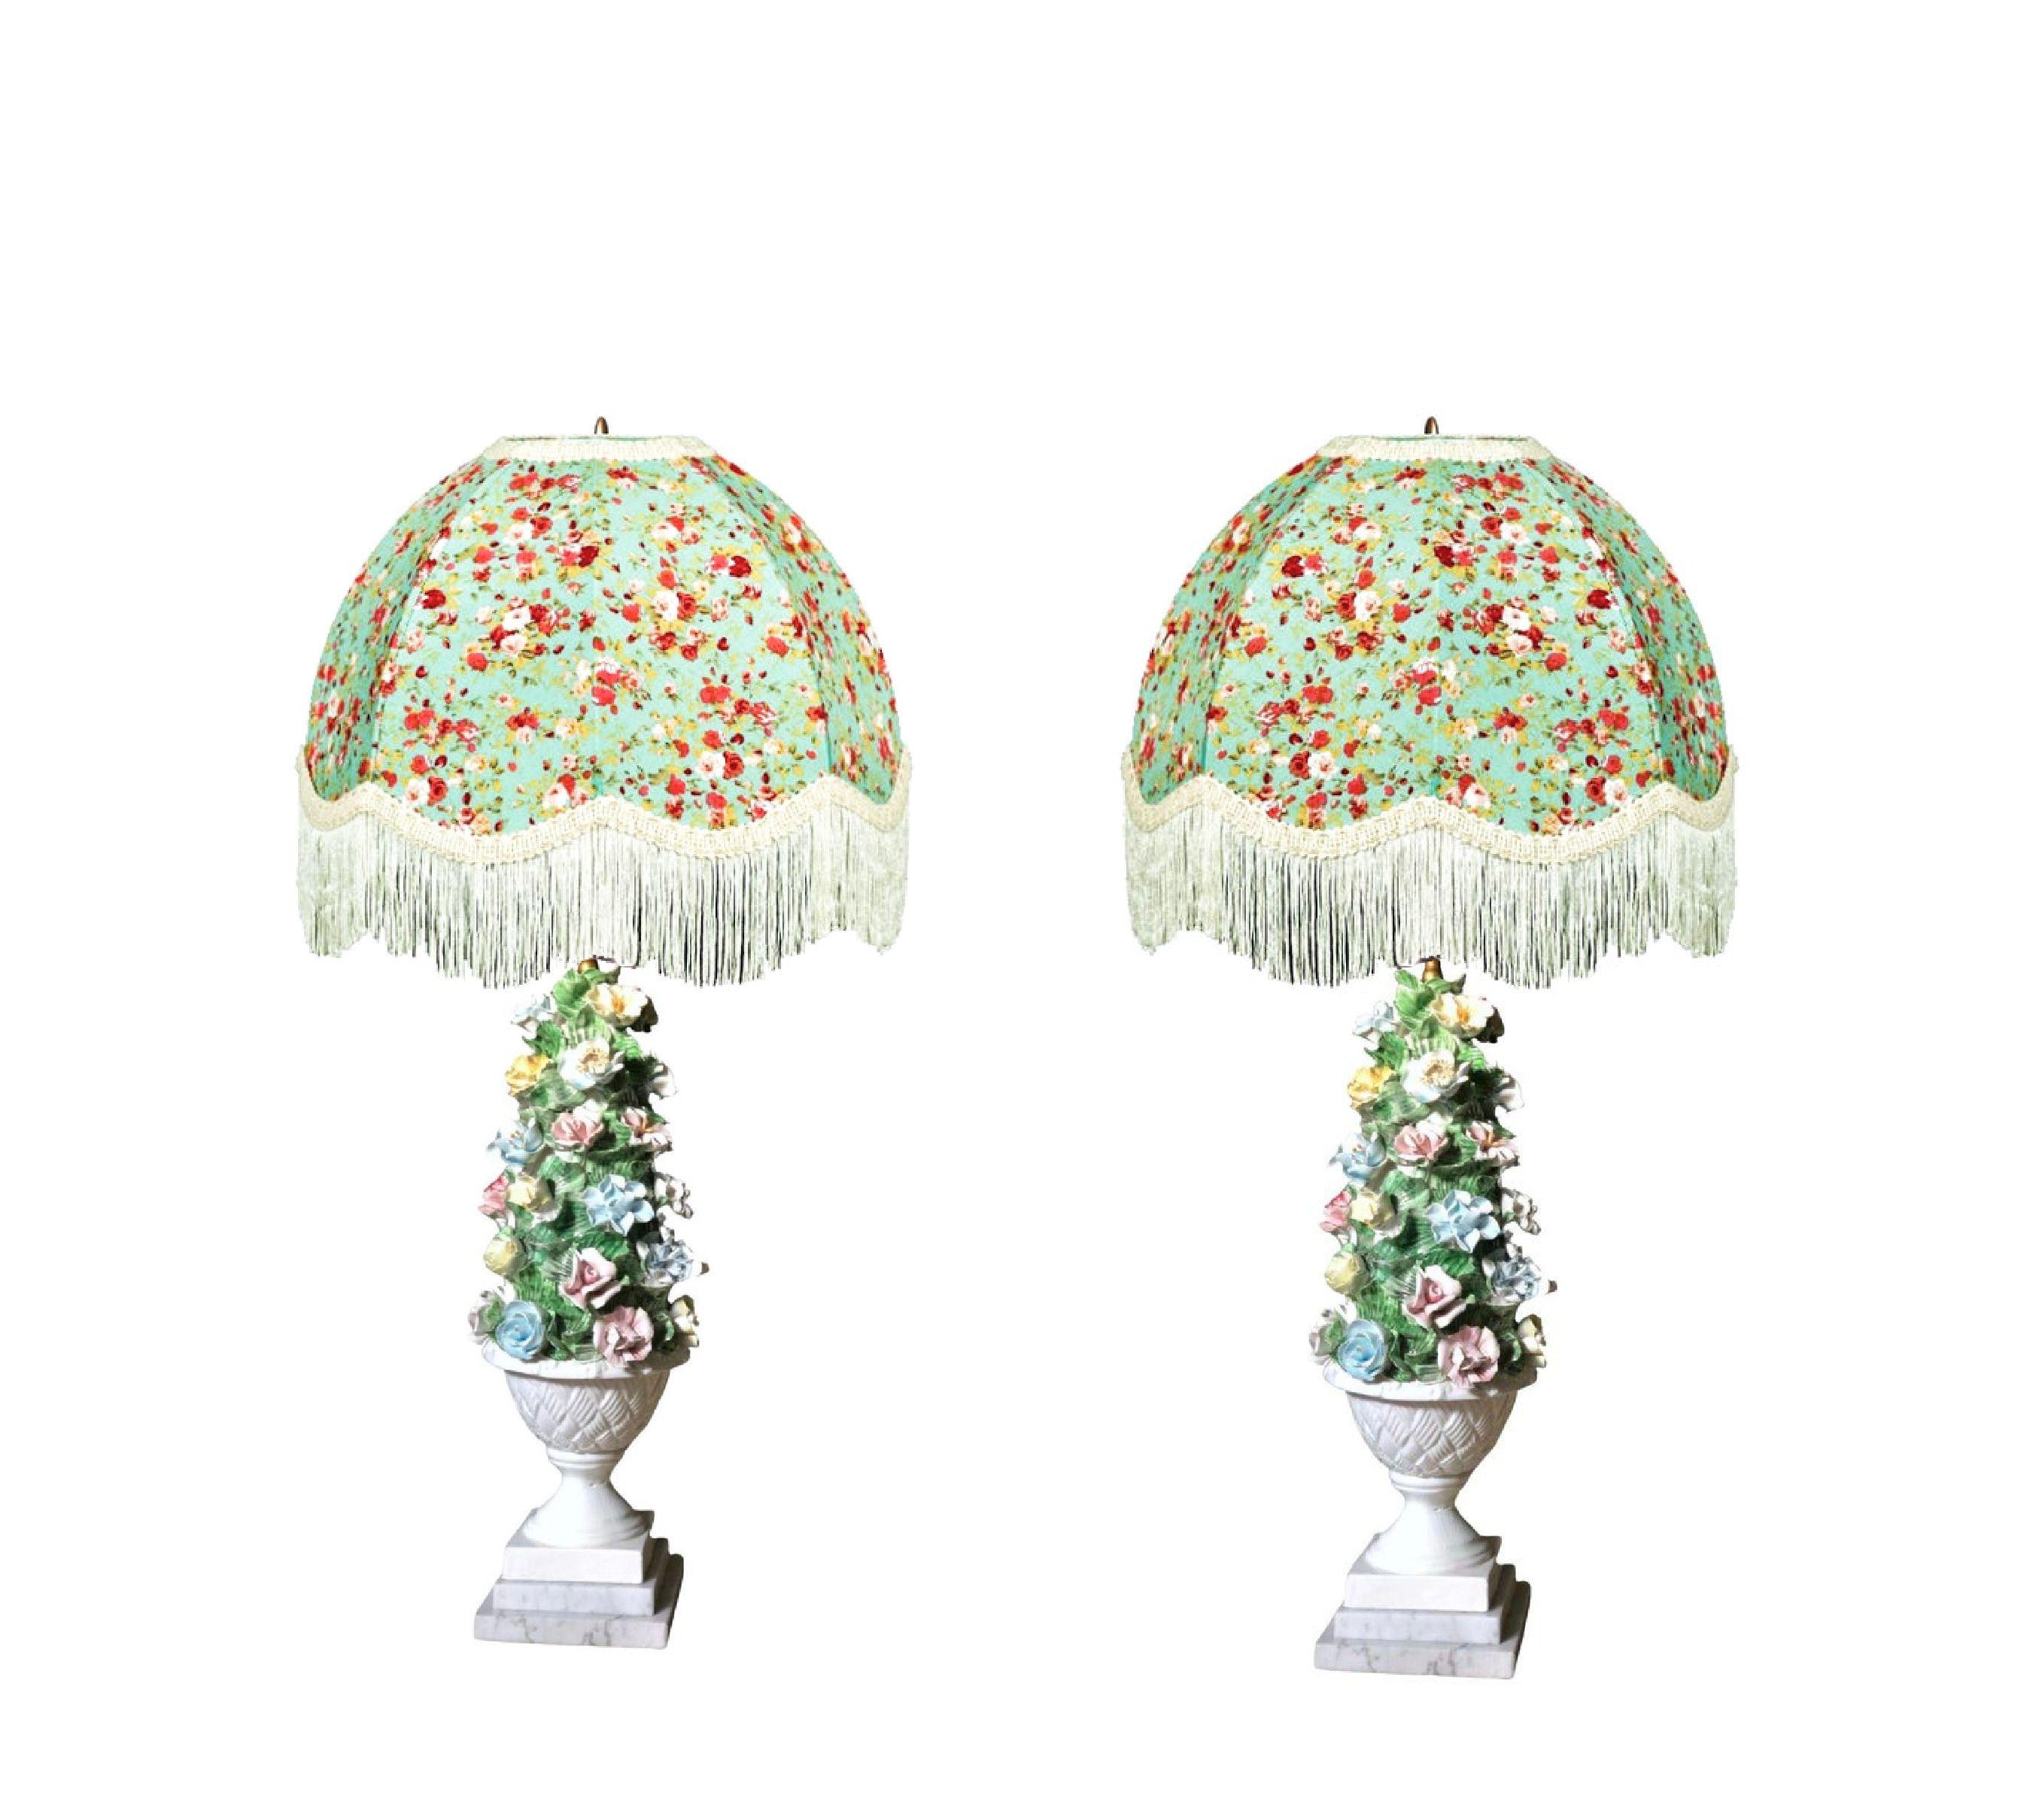 Midcentury Italian Modern Capodimonte Porcelain Topiary Floral Table Lamps